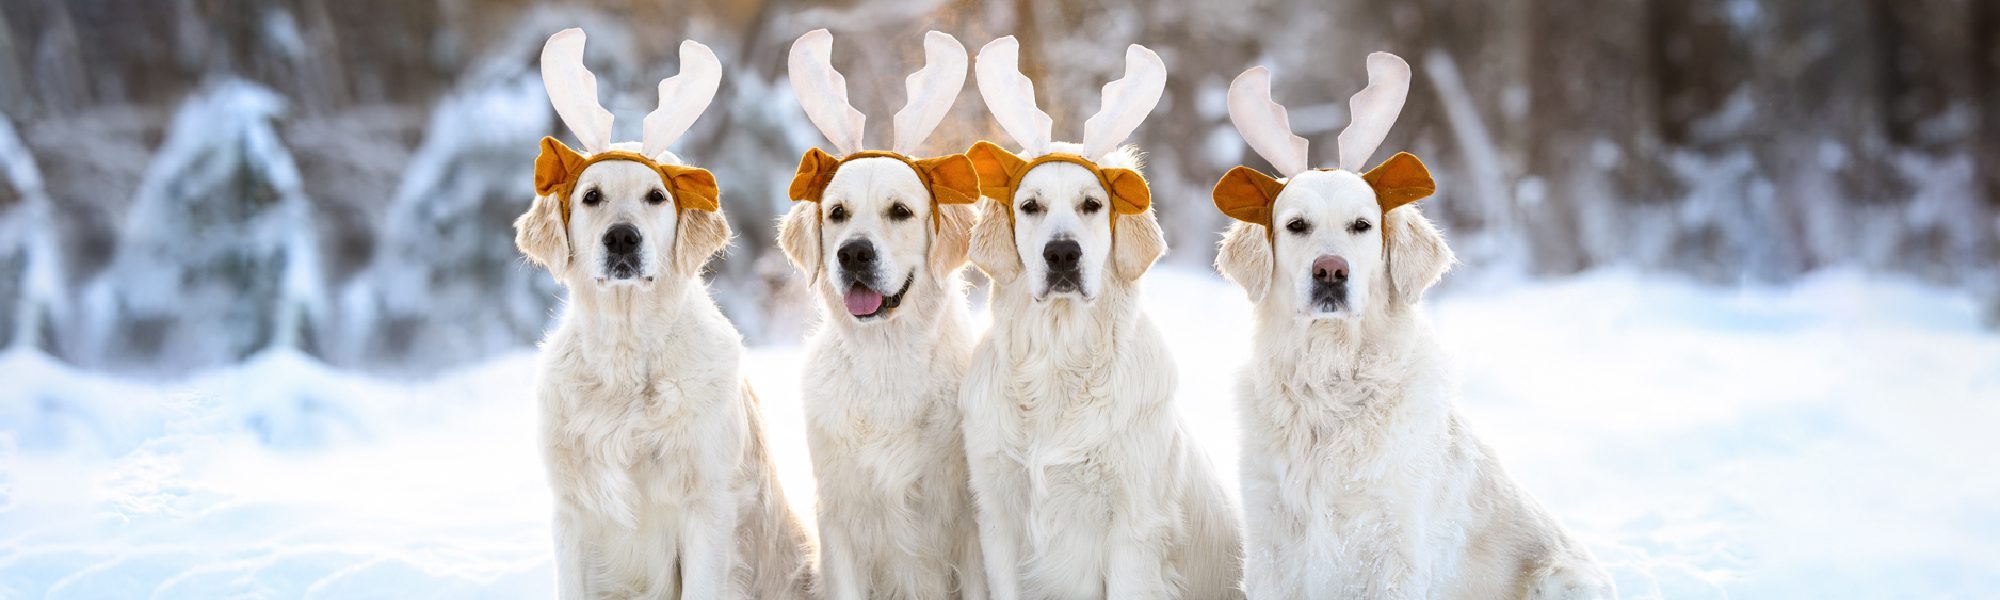 dogs dressed as reindeer in the snow